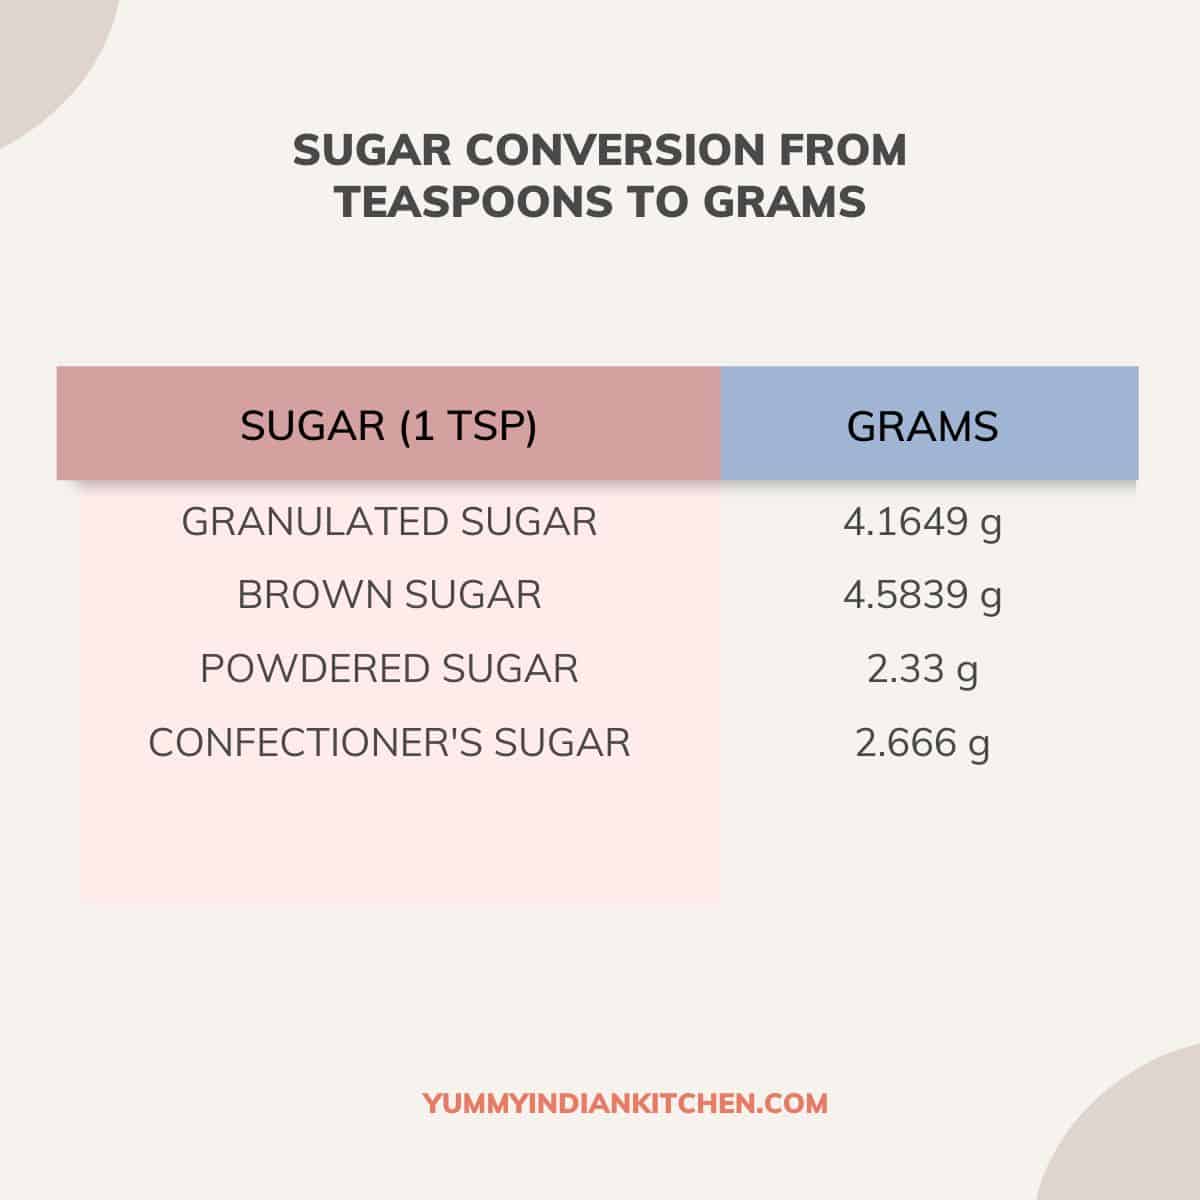 conversion chart with text showing different sugar types conversions from a teaspoon sugar to grams